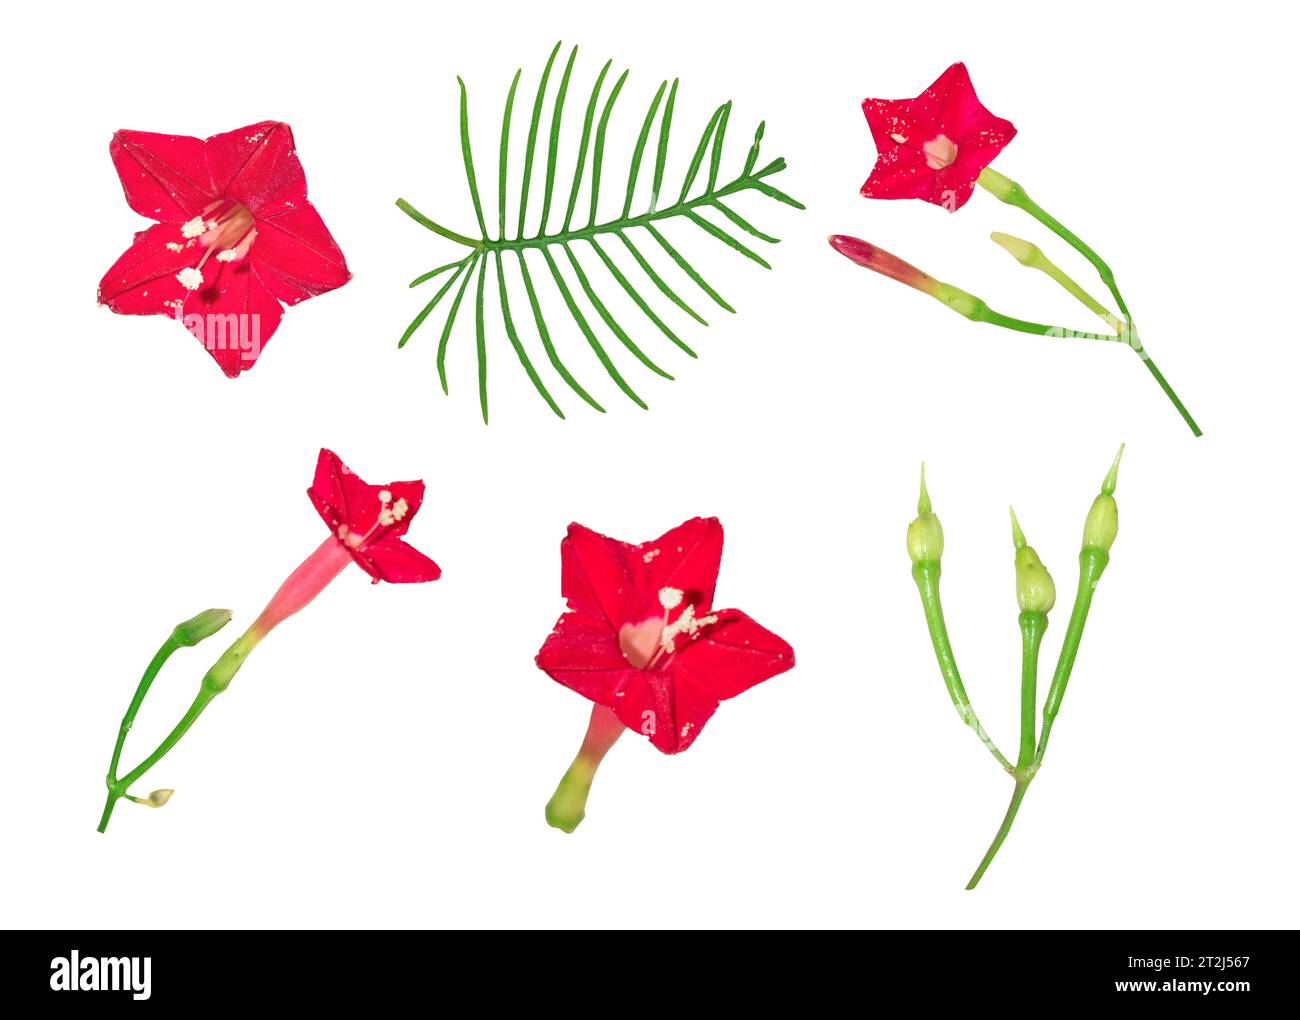 Beautiful Red Cypress Vine Flower Leaves Petals and Buds isolated on a white background Stock Photo